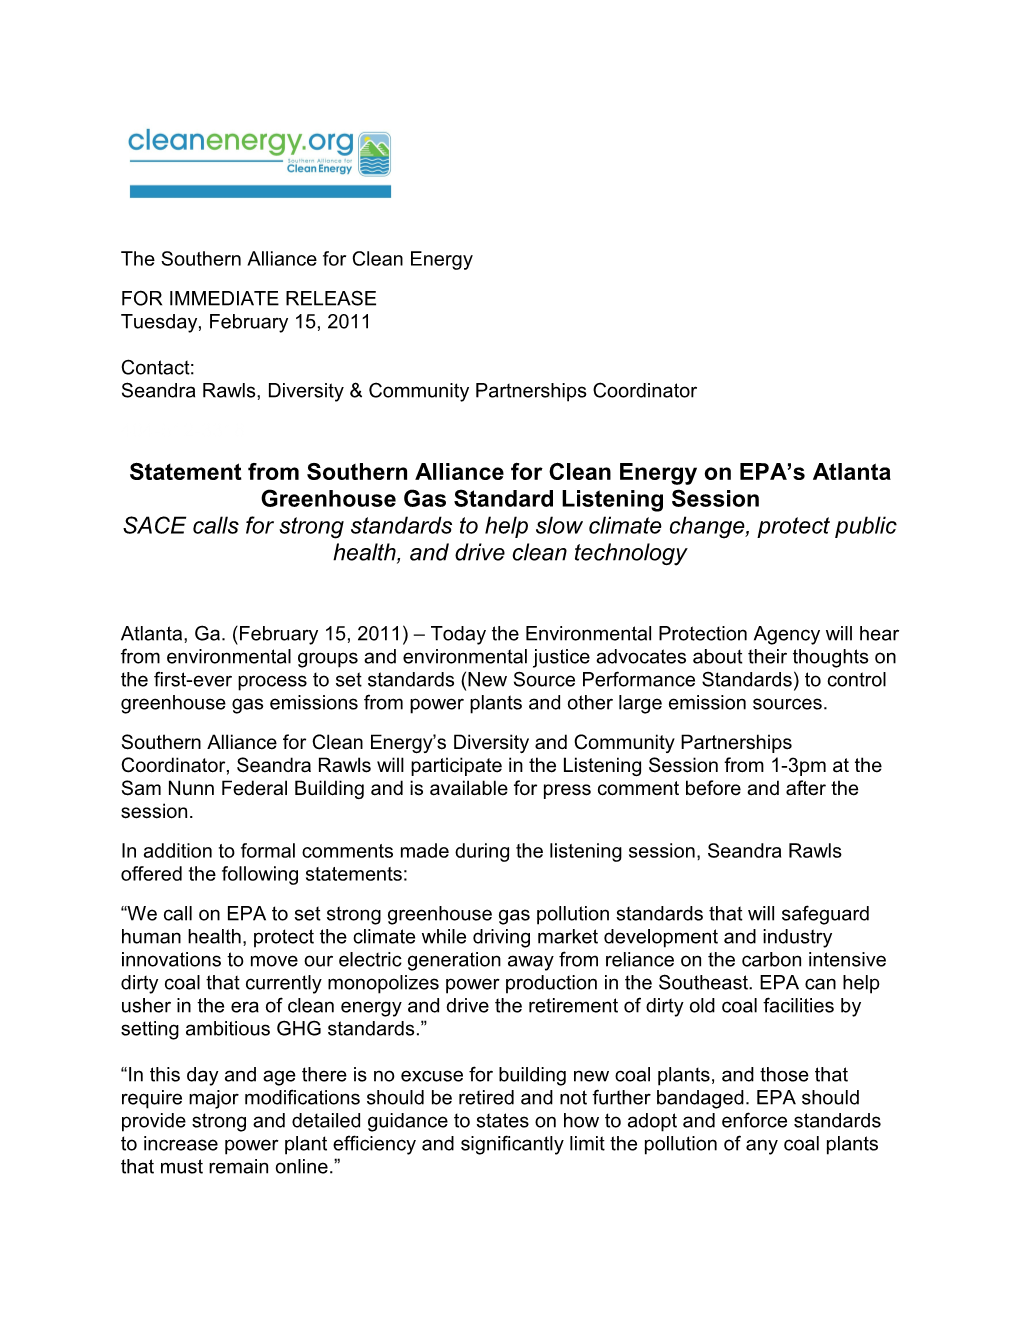 The Southern Alliance for Clean Energy